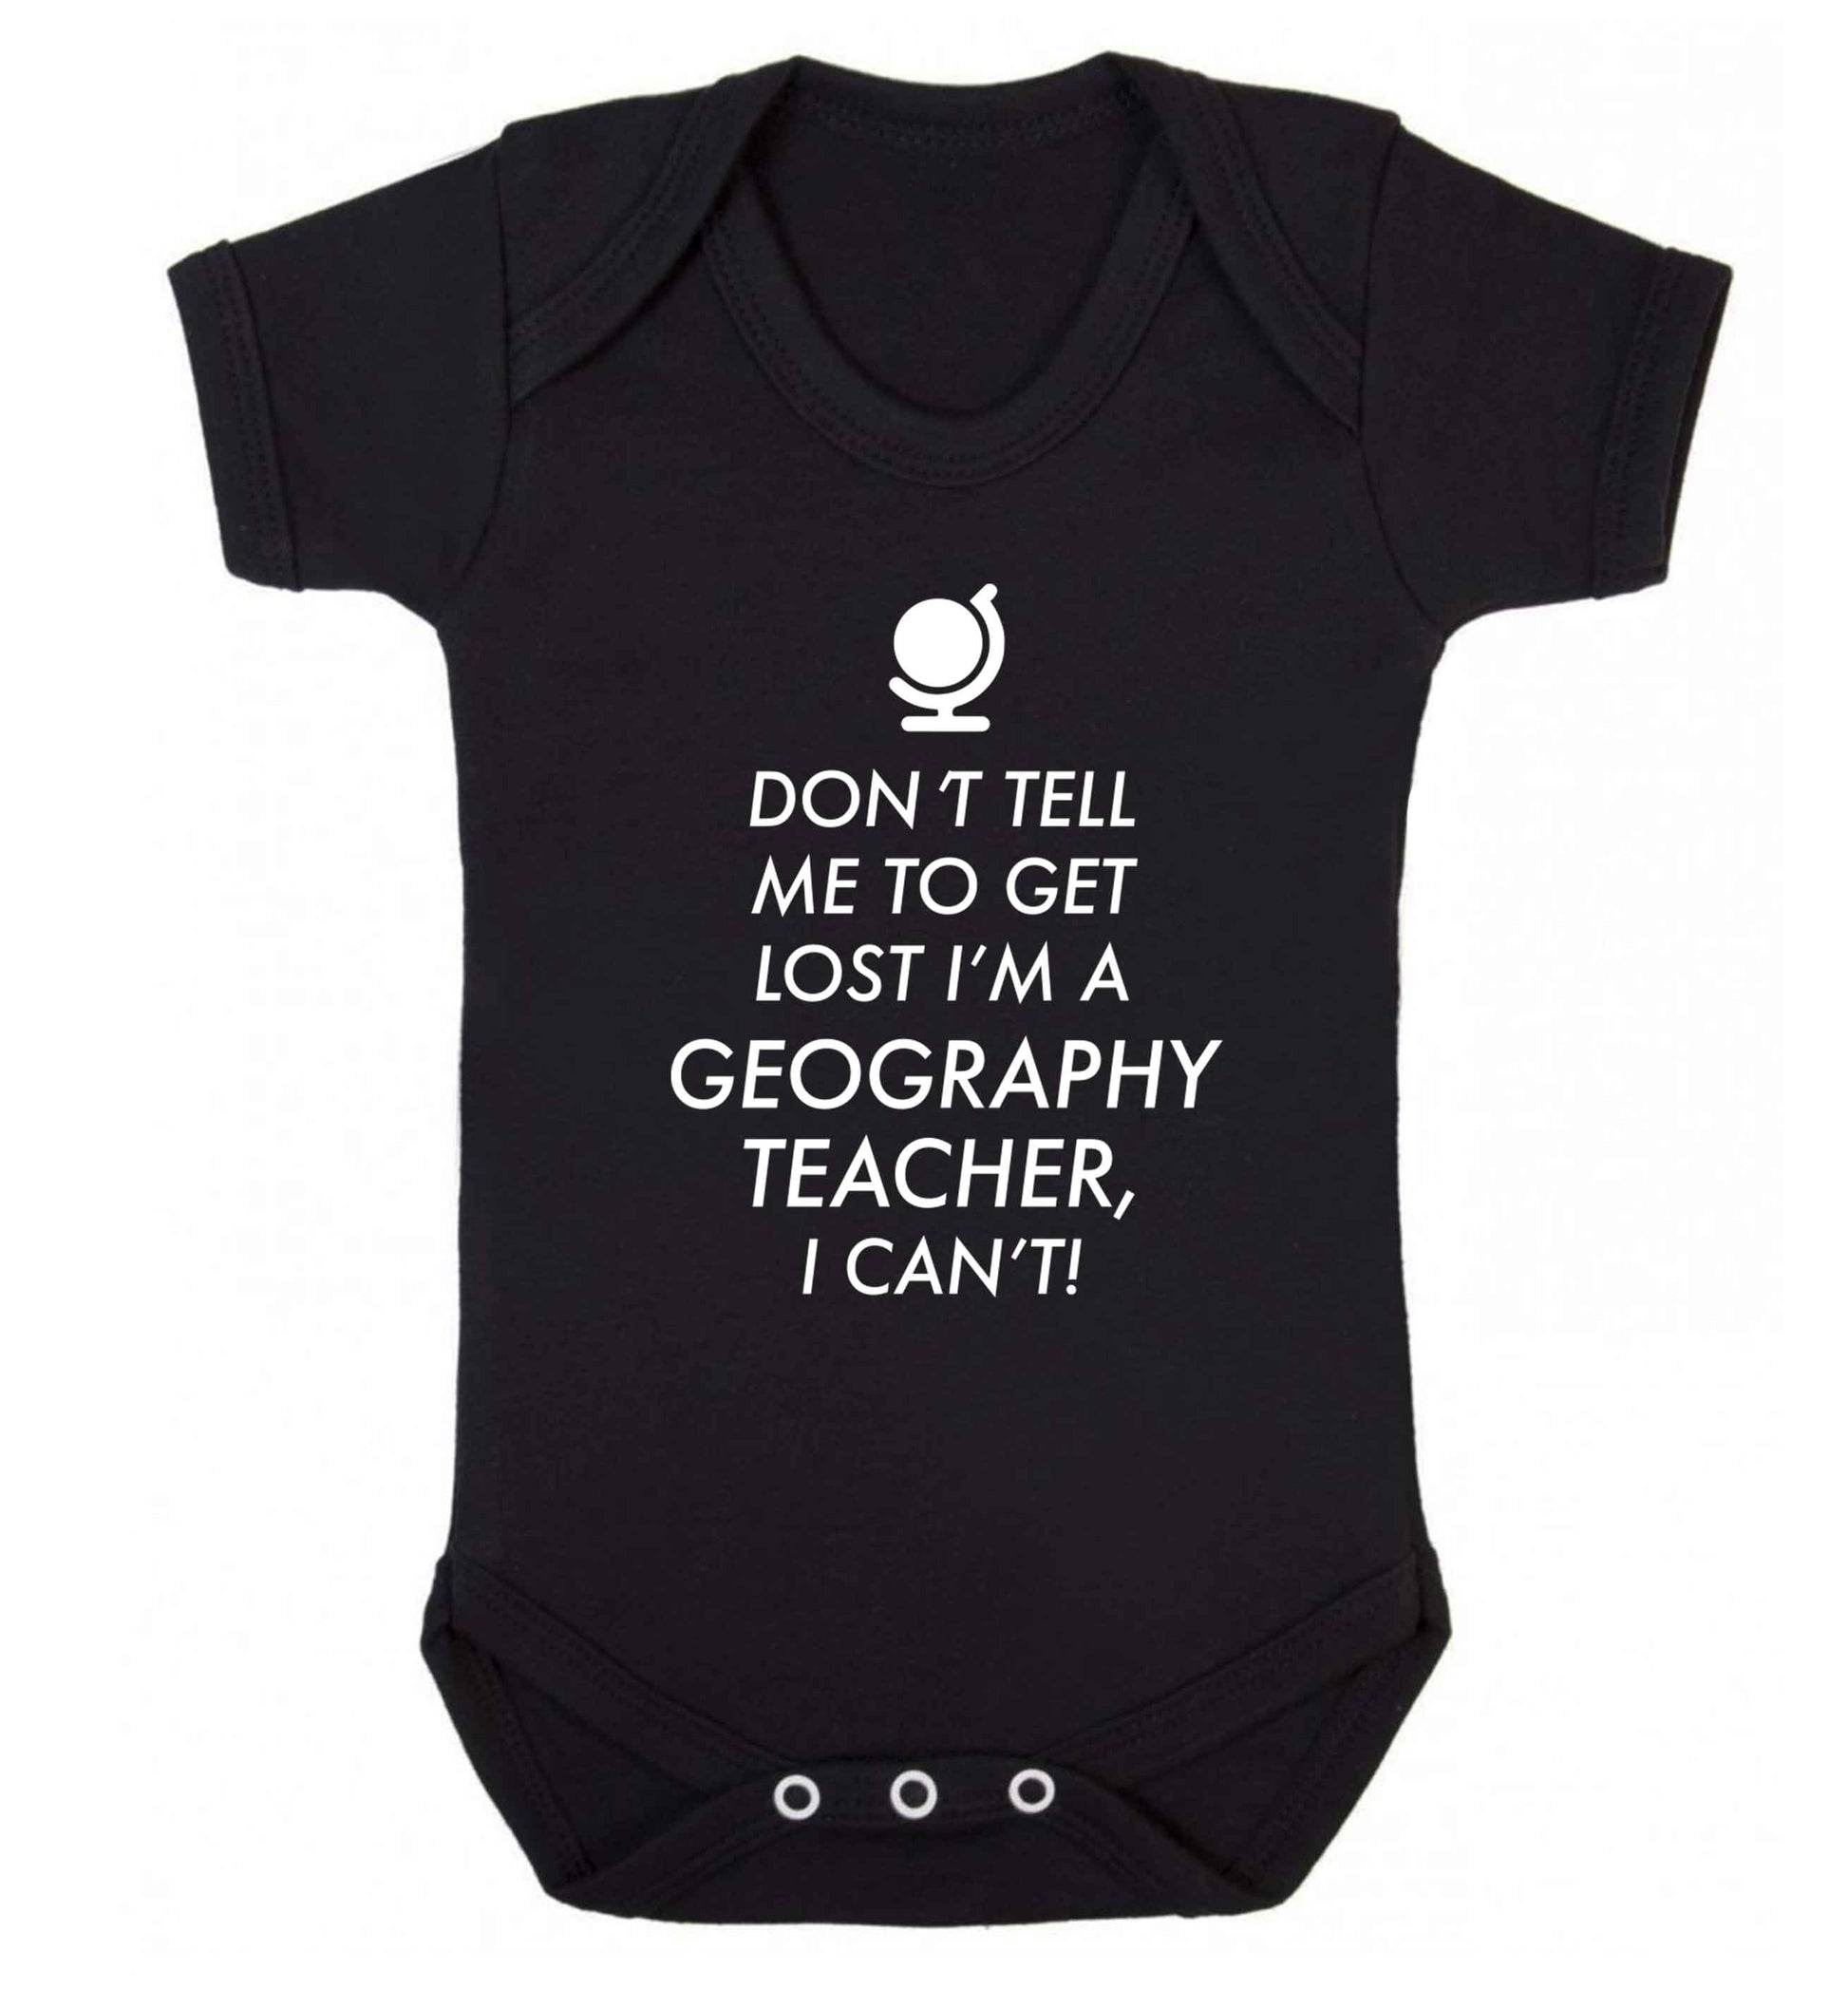 Don't tell me to get lost I'm a geography teacher, I can't Baby Vest black 18-24 months